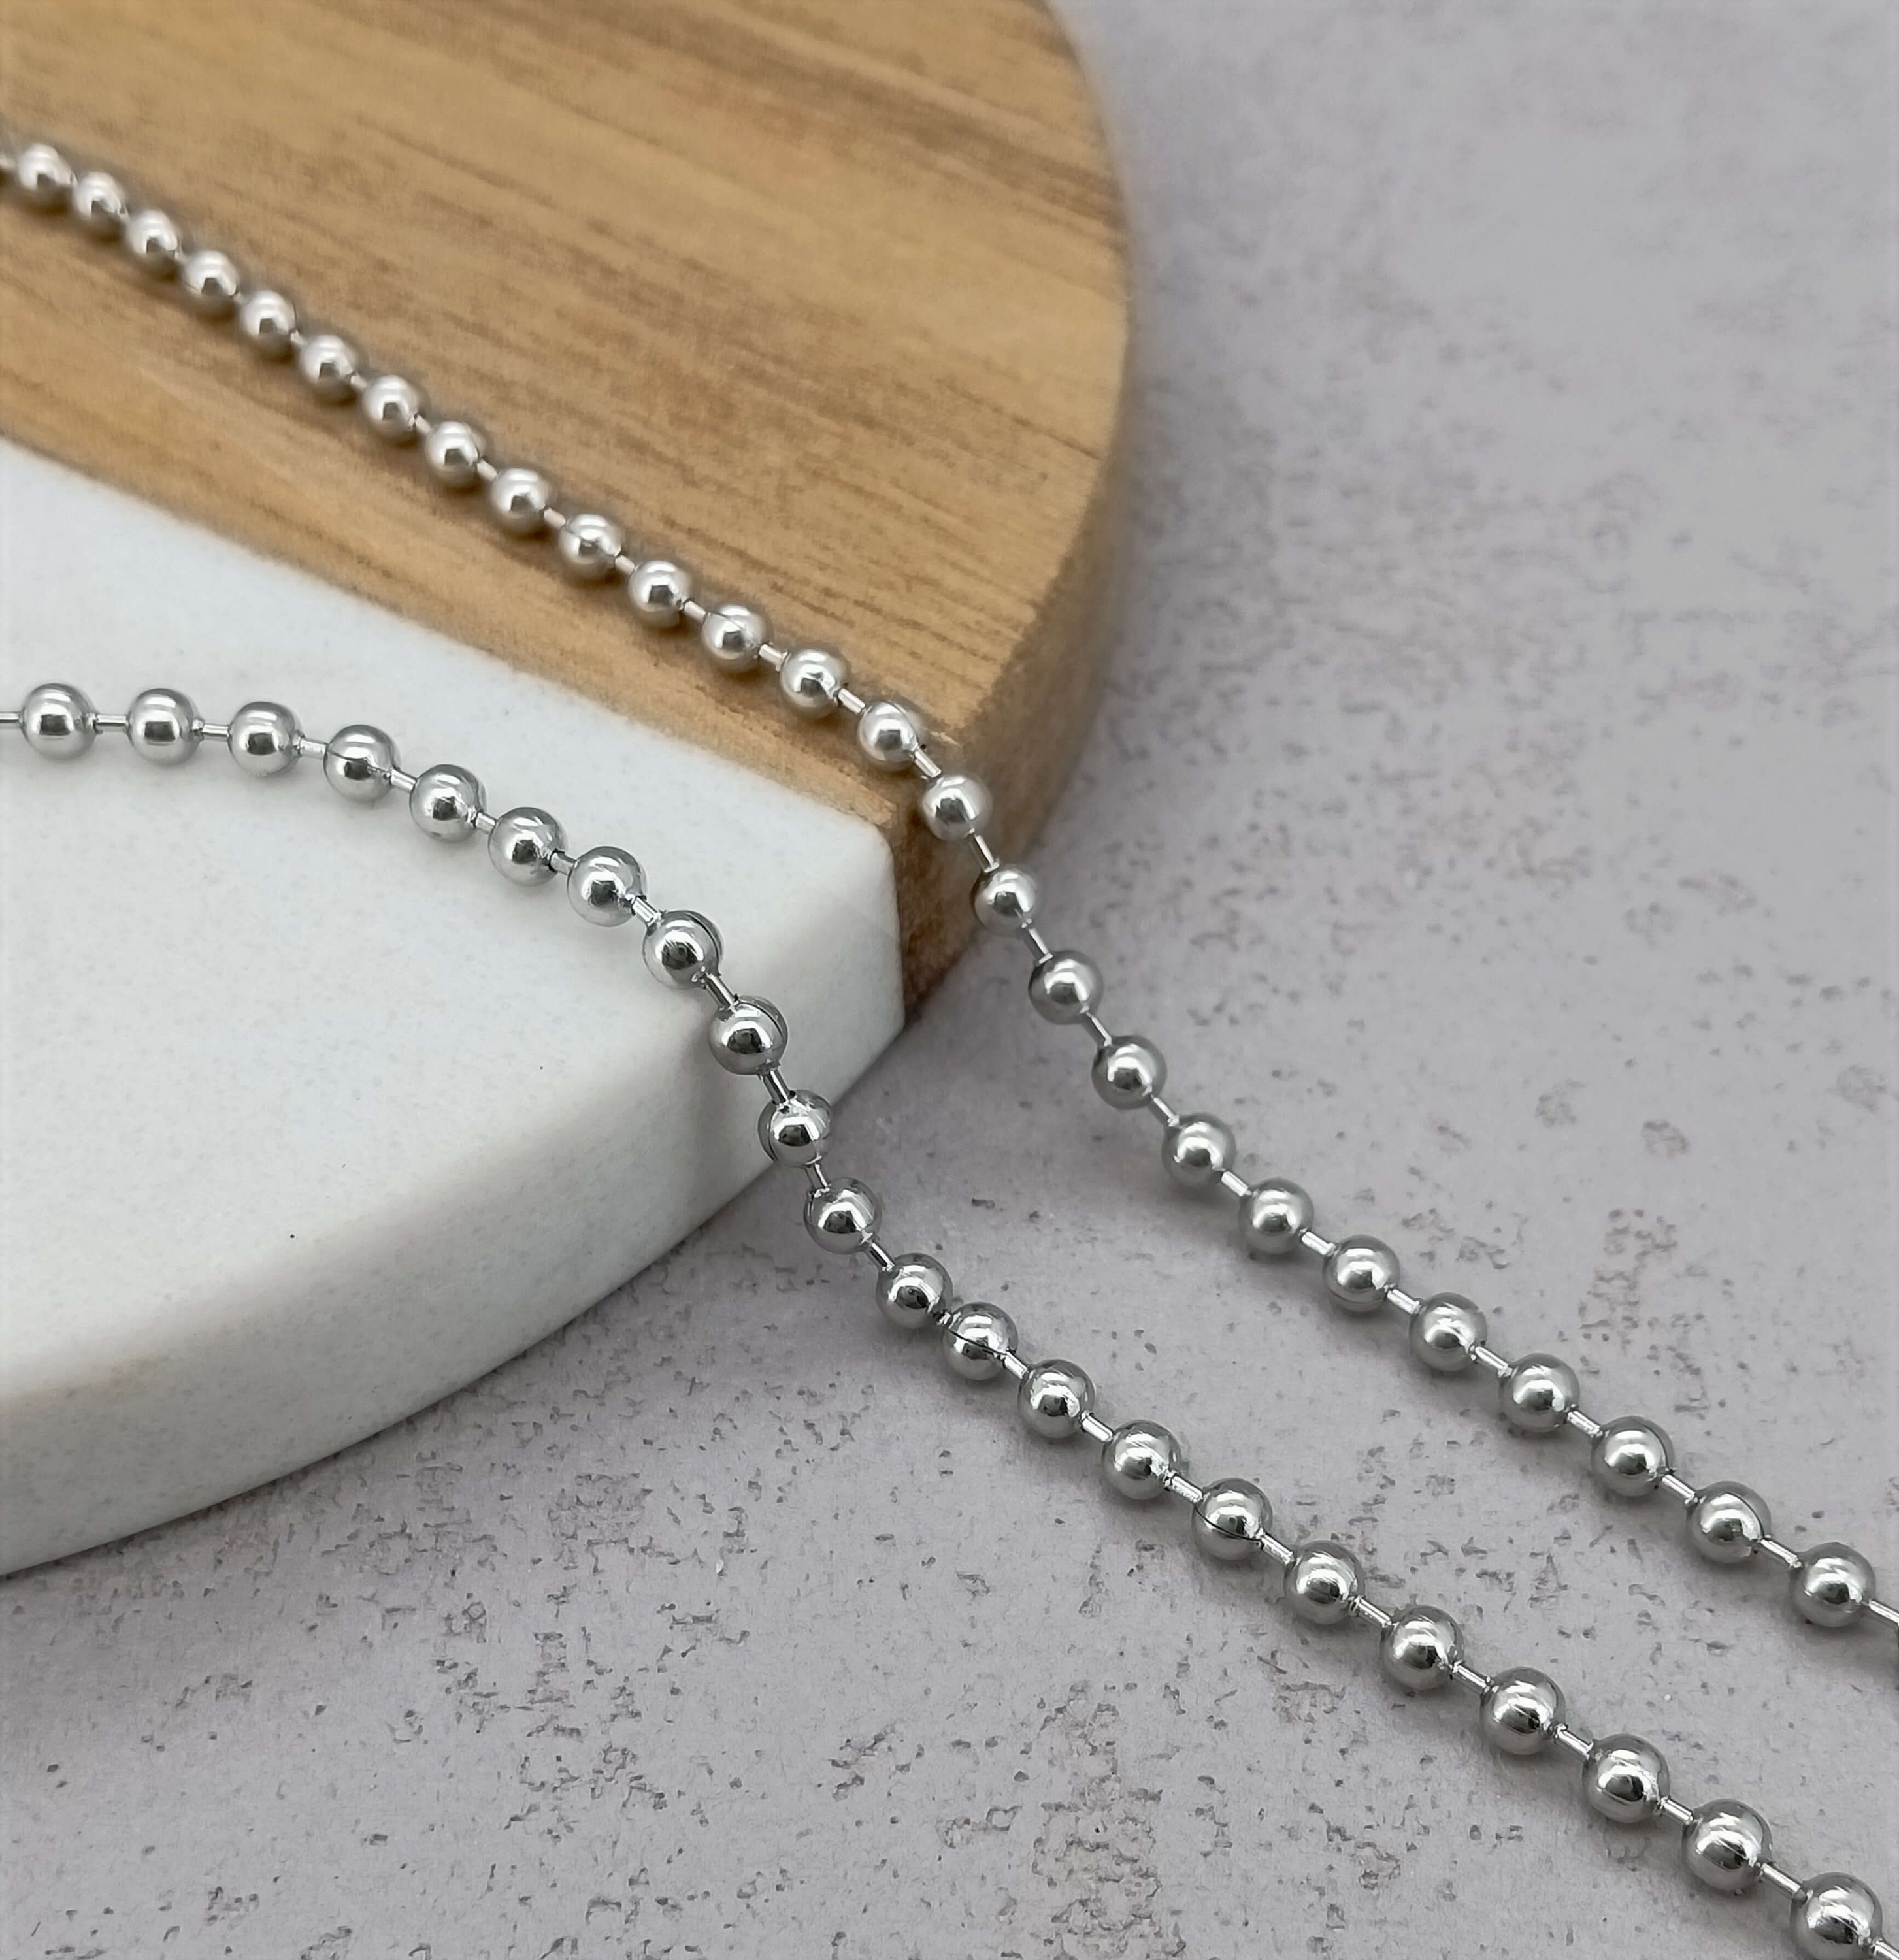 10pcs Bead Chain,304 Stainless Steel Dog Tag Chain Ball Chain Necklace  Bulk, Beaded Necklace Chains for Jewelry Making DIY Crafts